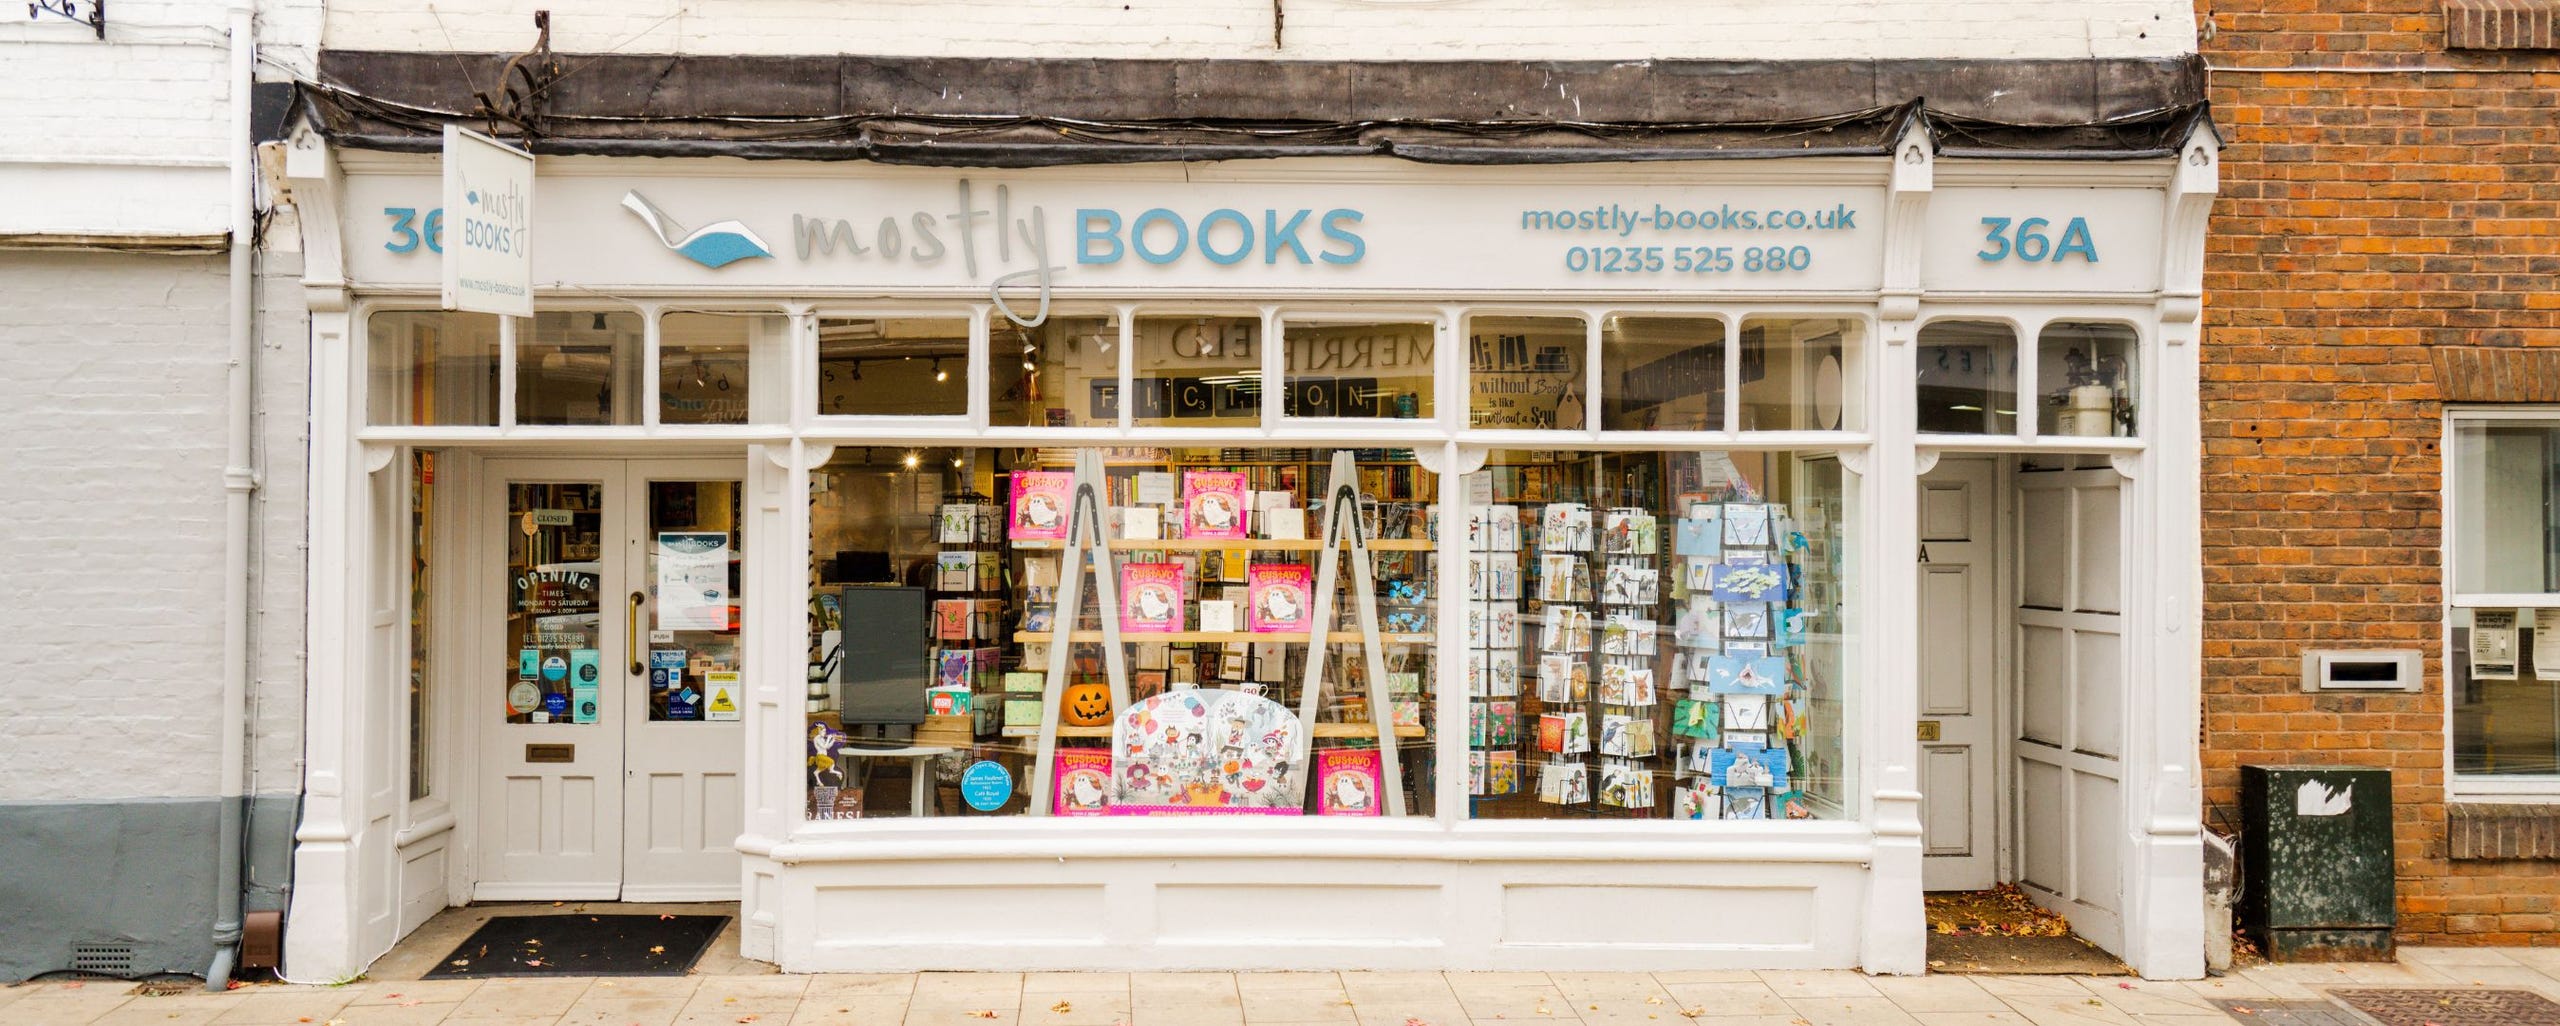 the front of a book shop 